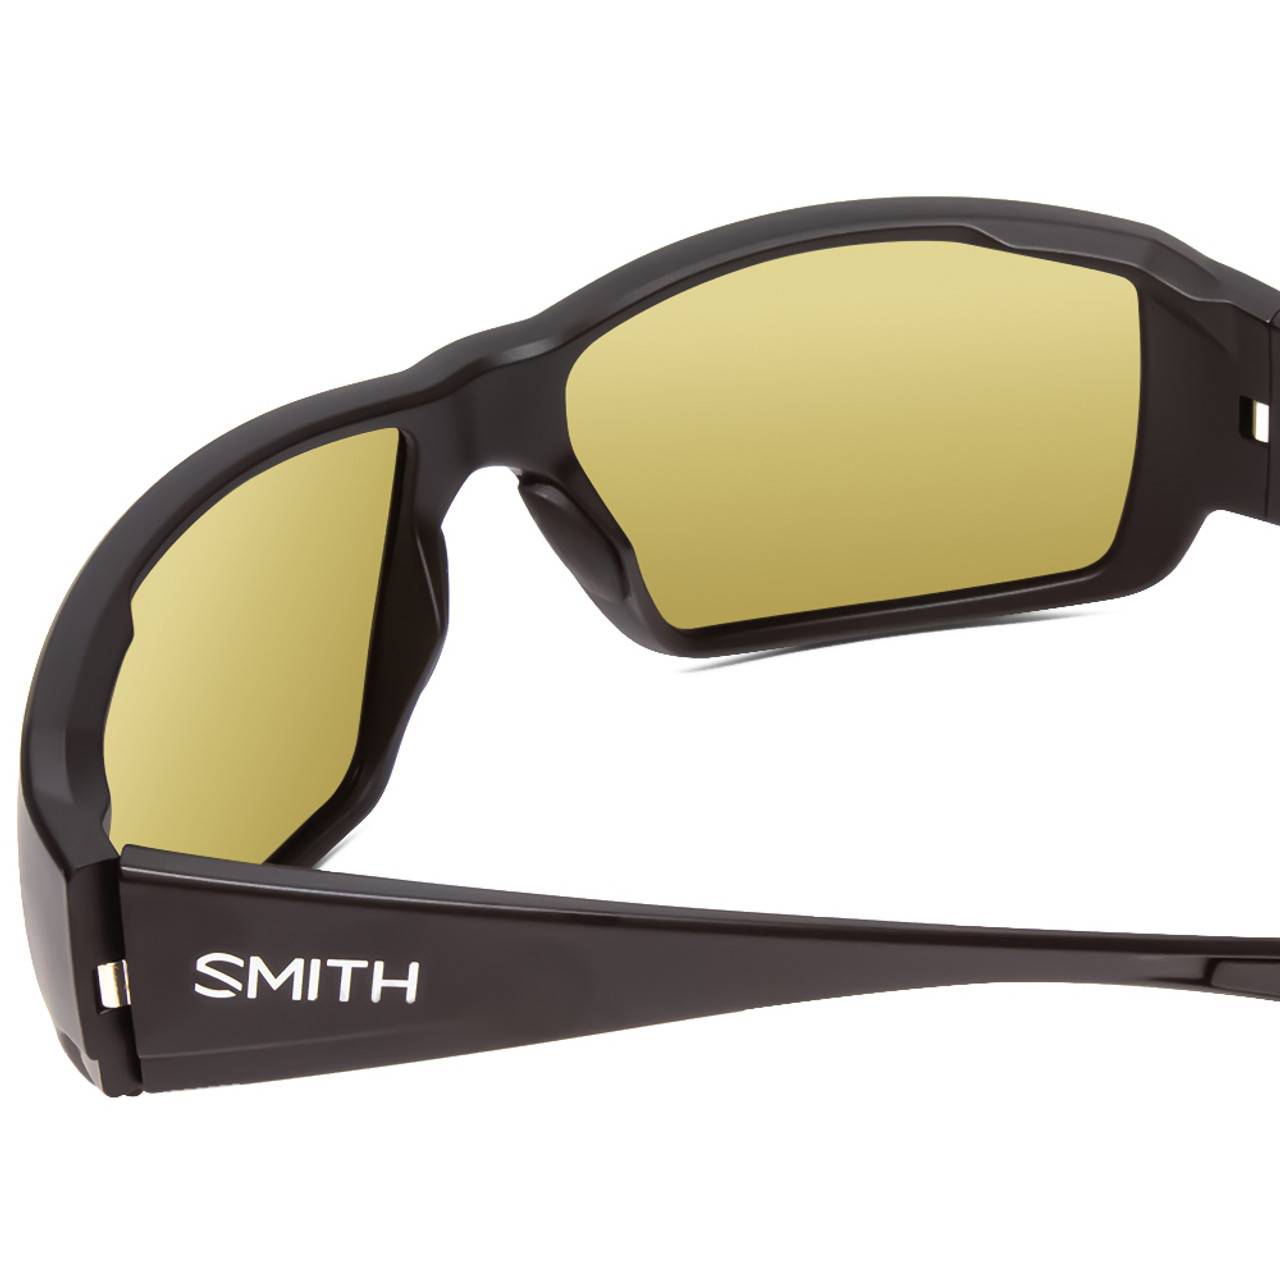 Close Up View of Smith Guides Choice Sunglasses Black/Chromapop Glass Polarized Light Yellow 62mm